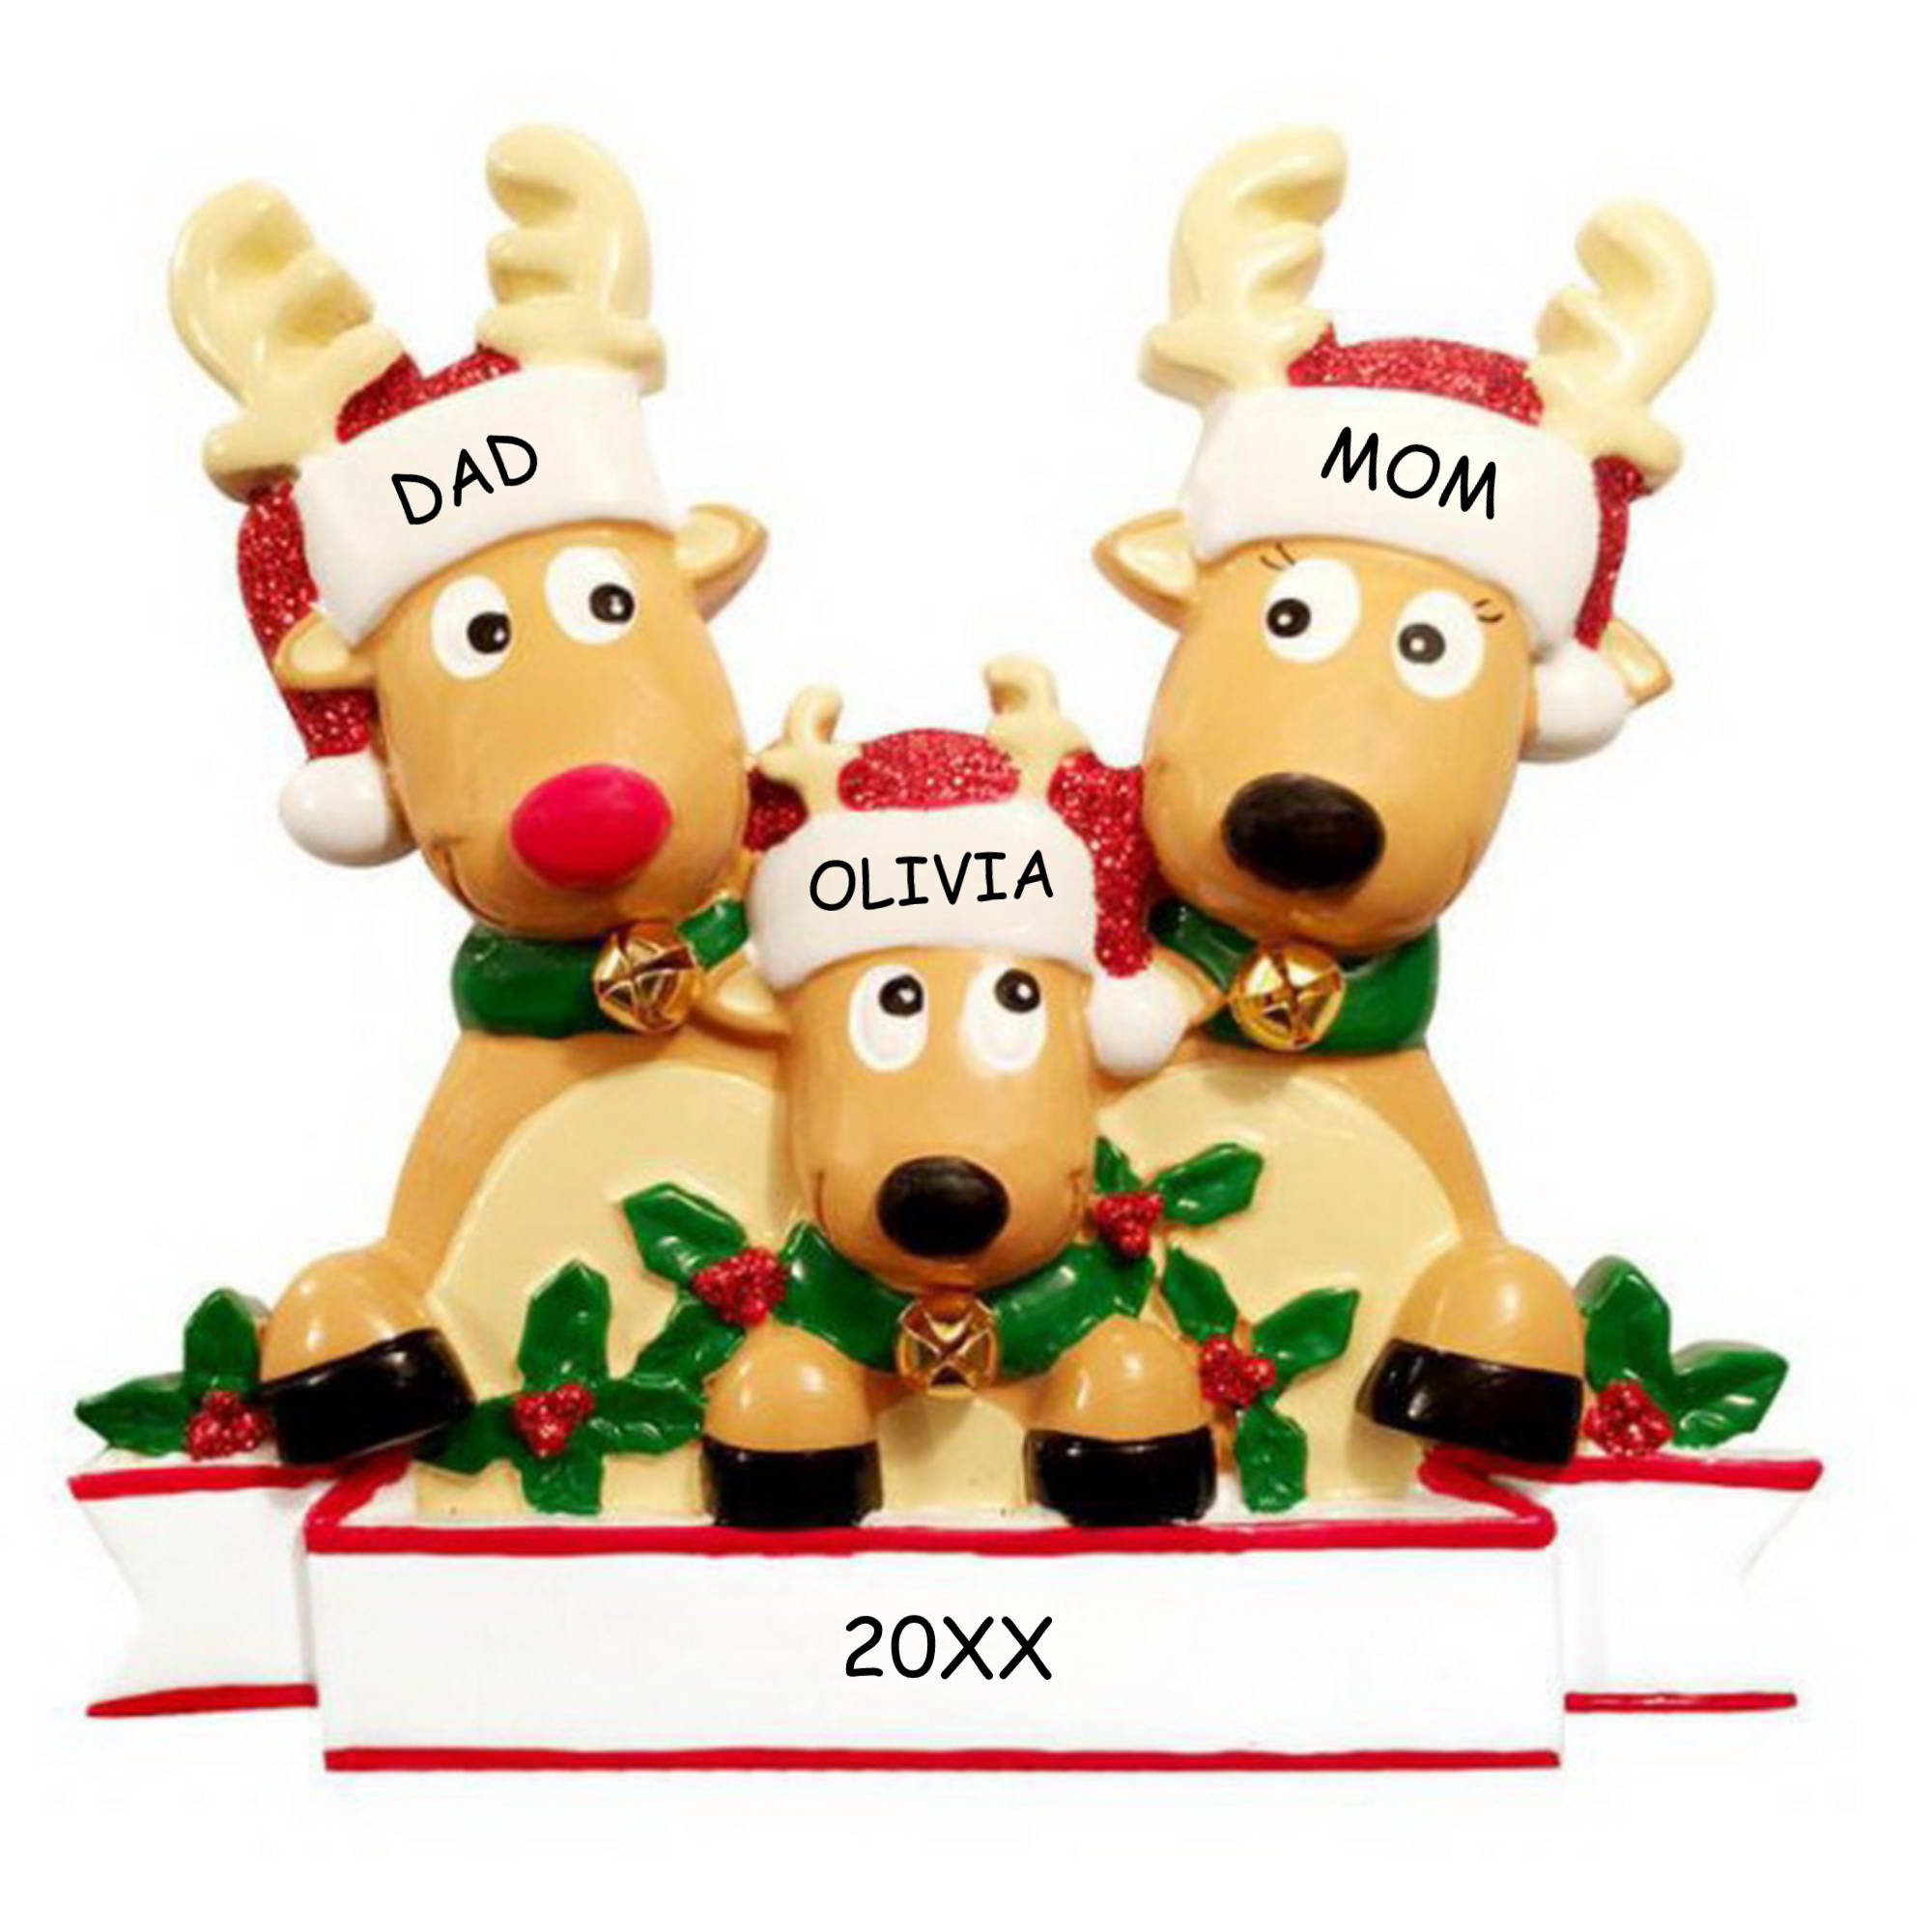 Personalized Cozy Reindeer Family Christmas Ornament - Family of 3